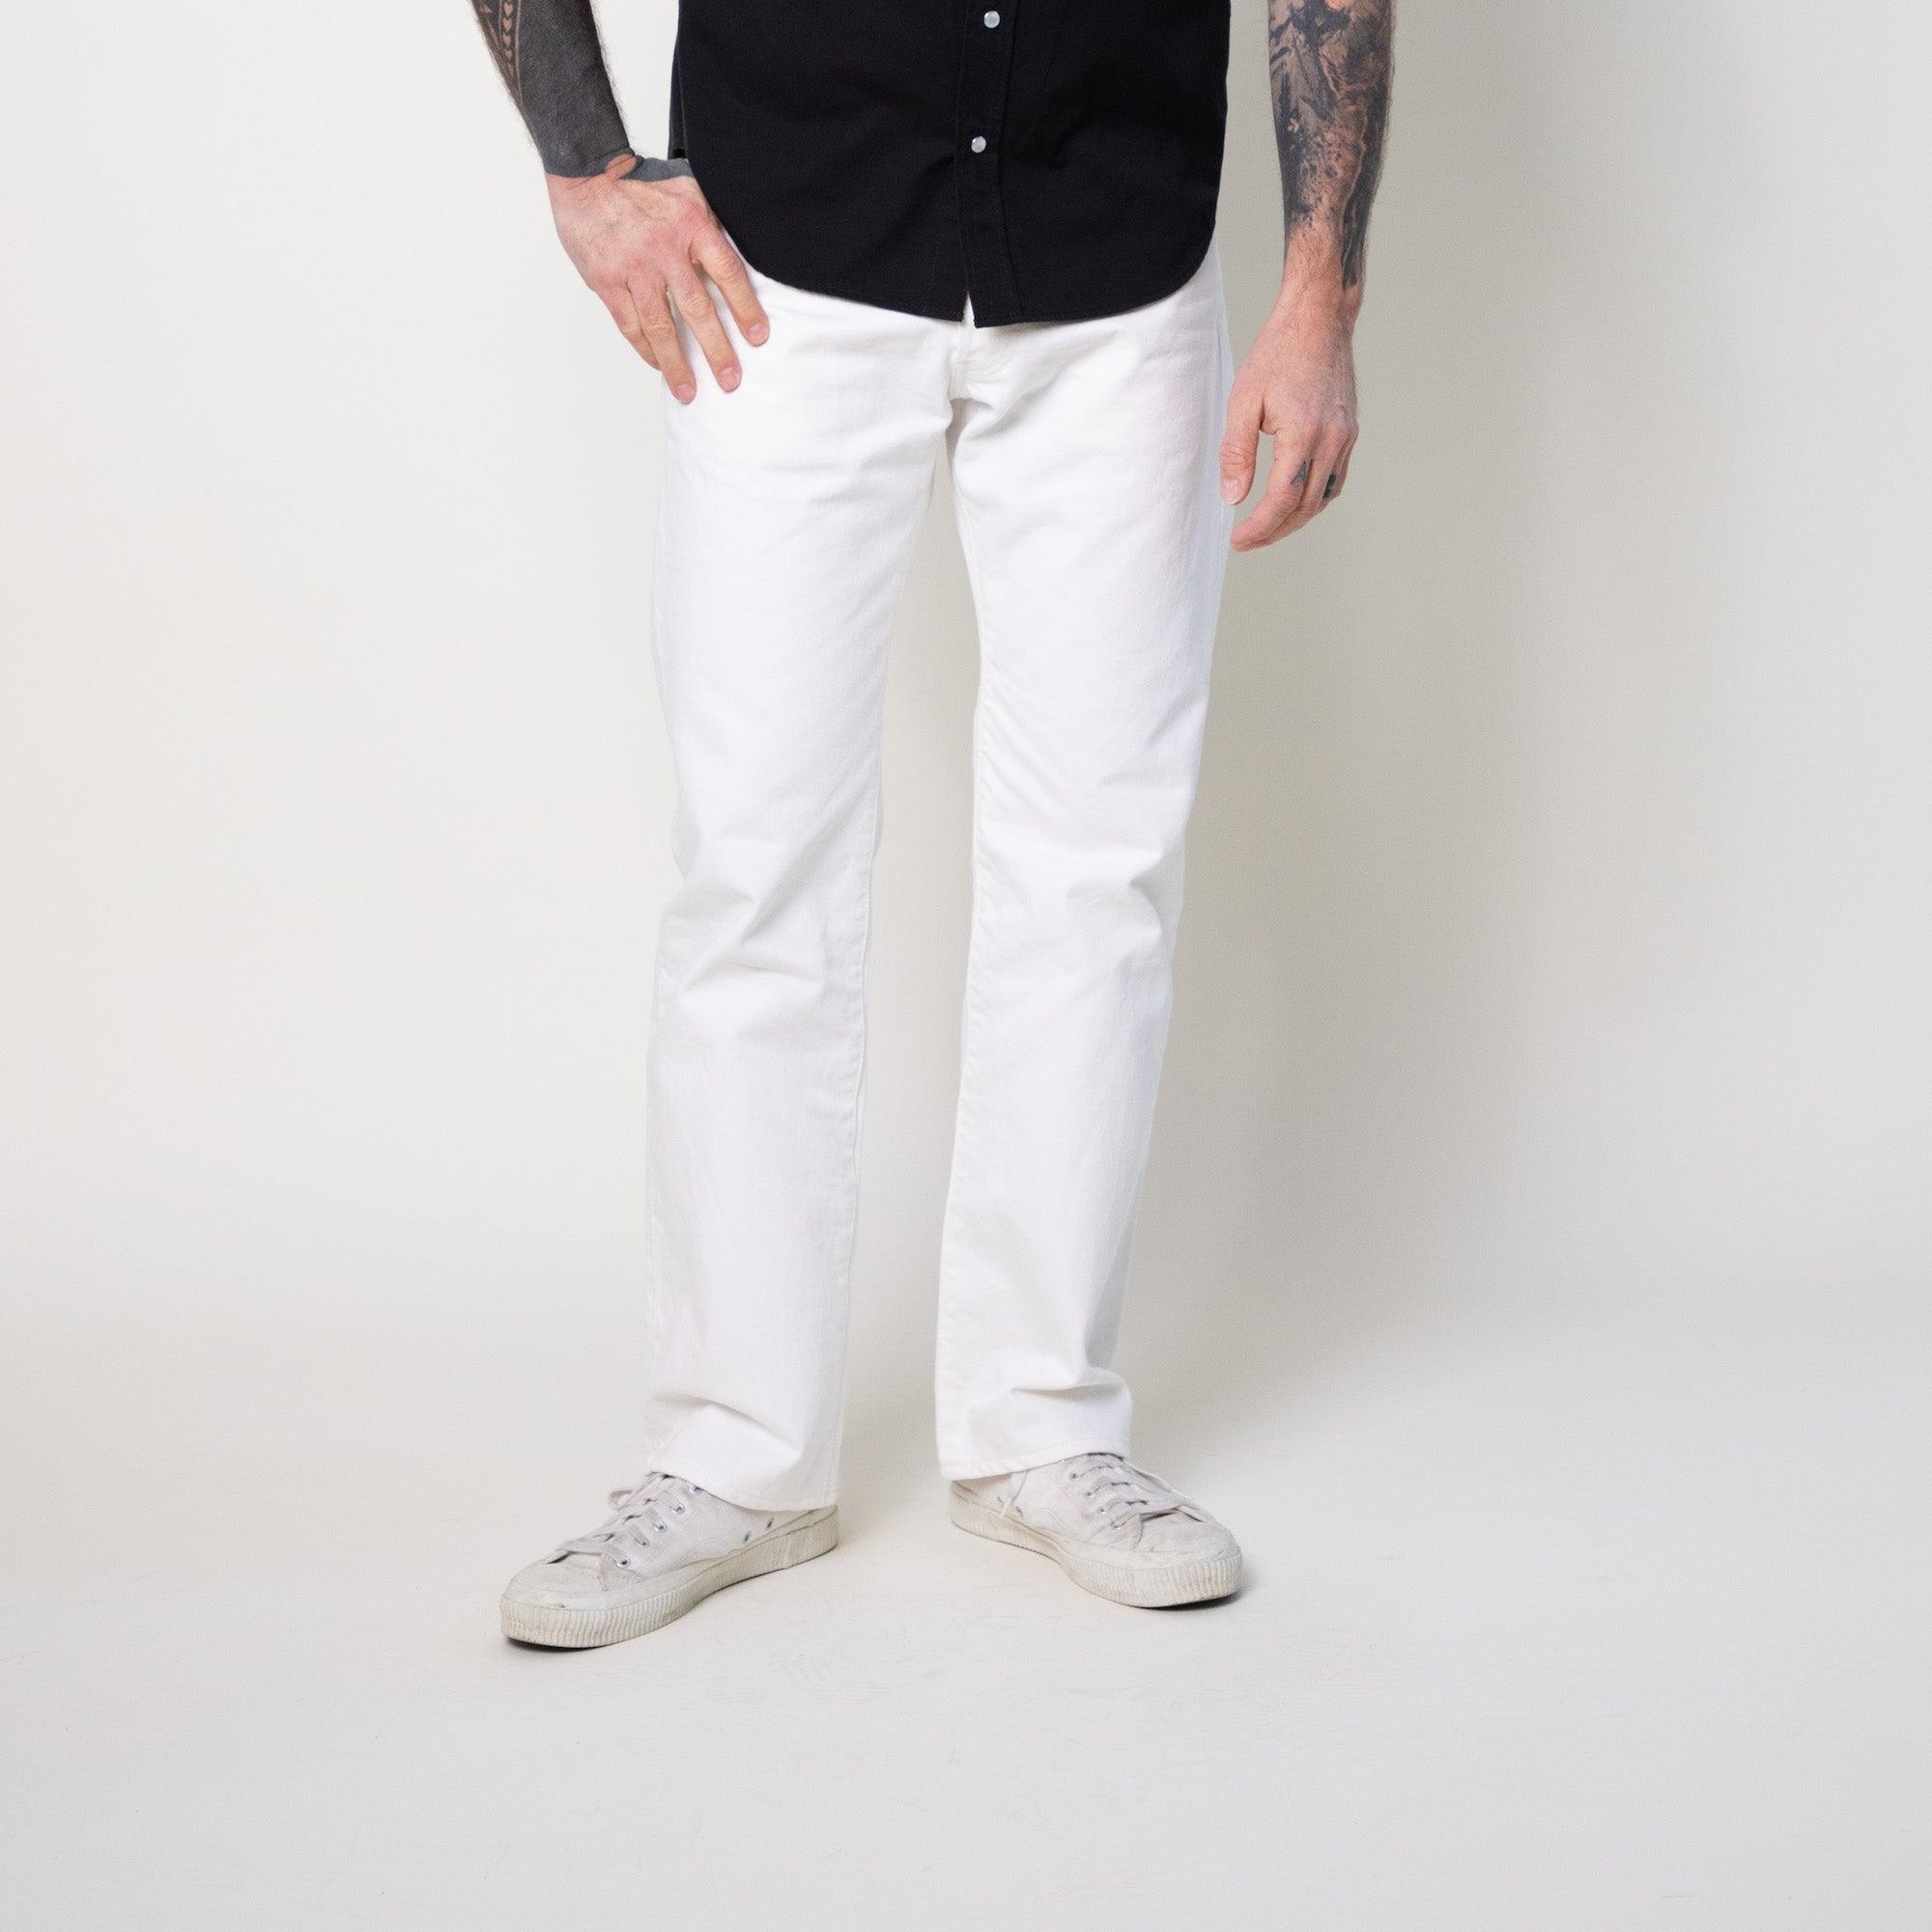 Image showing the IH-634-WT - 13.5oz Cotton Twill Straight Cut Trousers - White which is a Jeans described by the following info SS24 and sold on the IRON HEART GERMANY online store